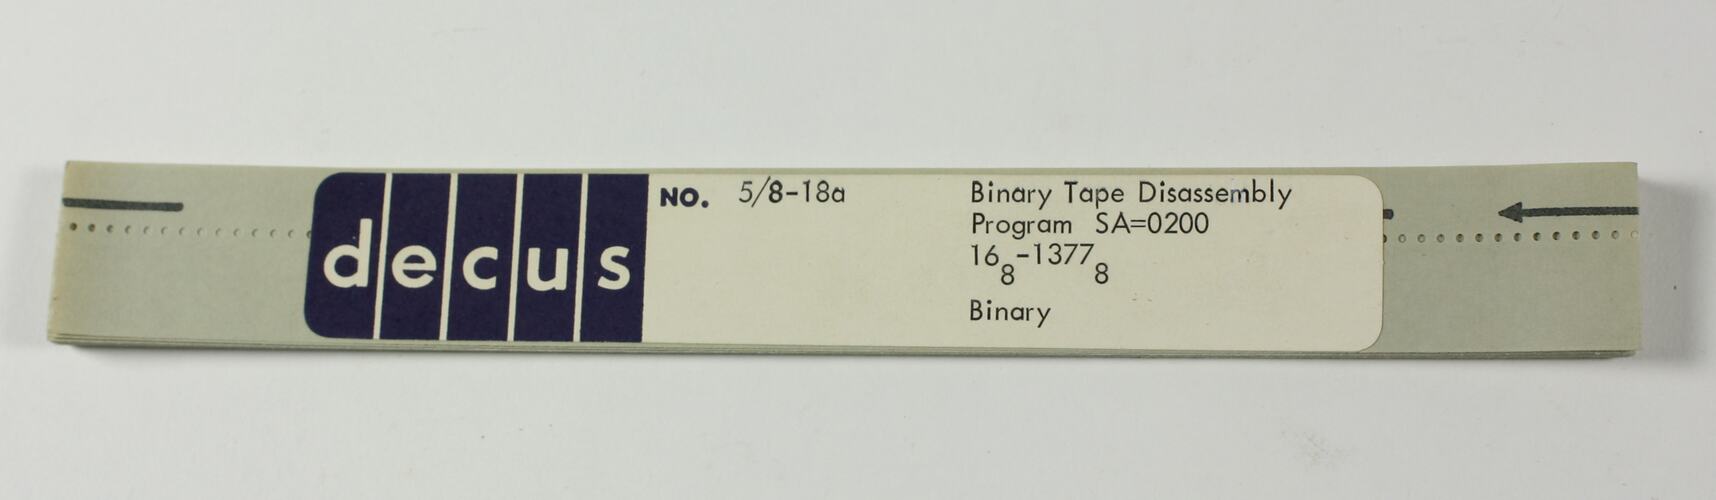 Paper Tape - DECUS, '5/8-18a Binary Tape Disassembly Program'